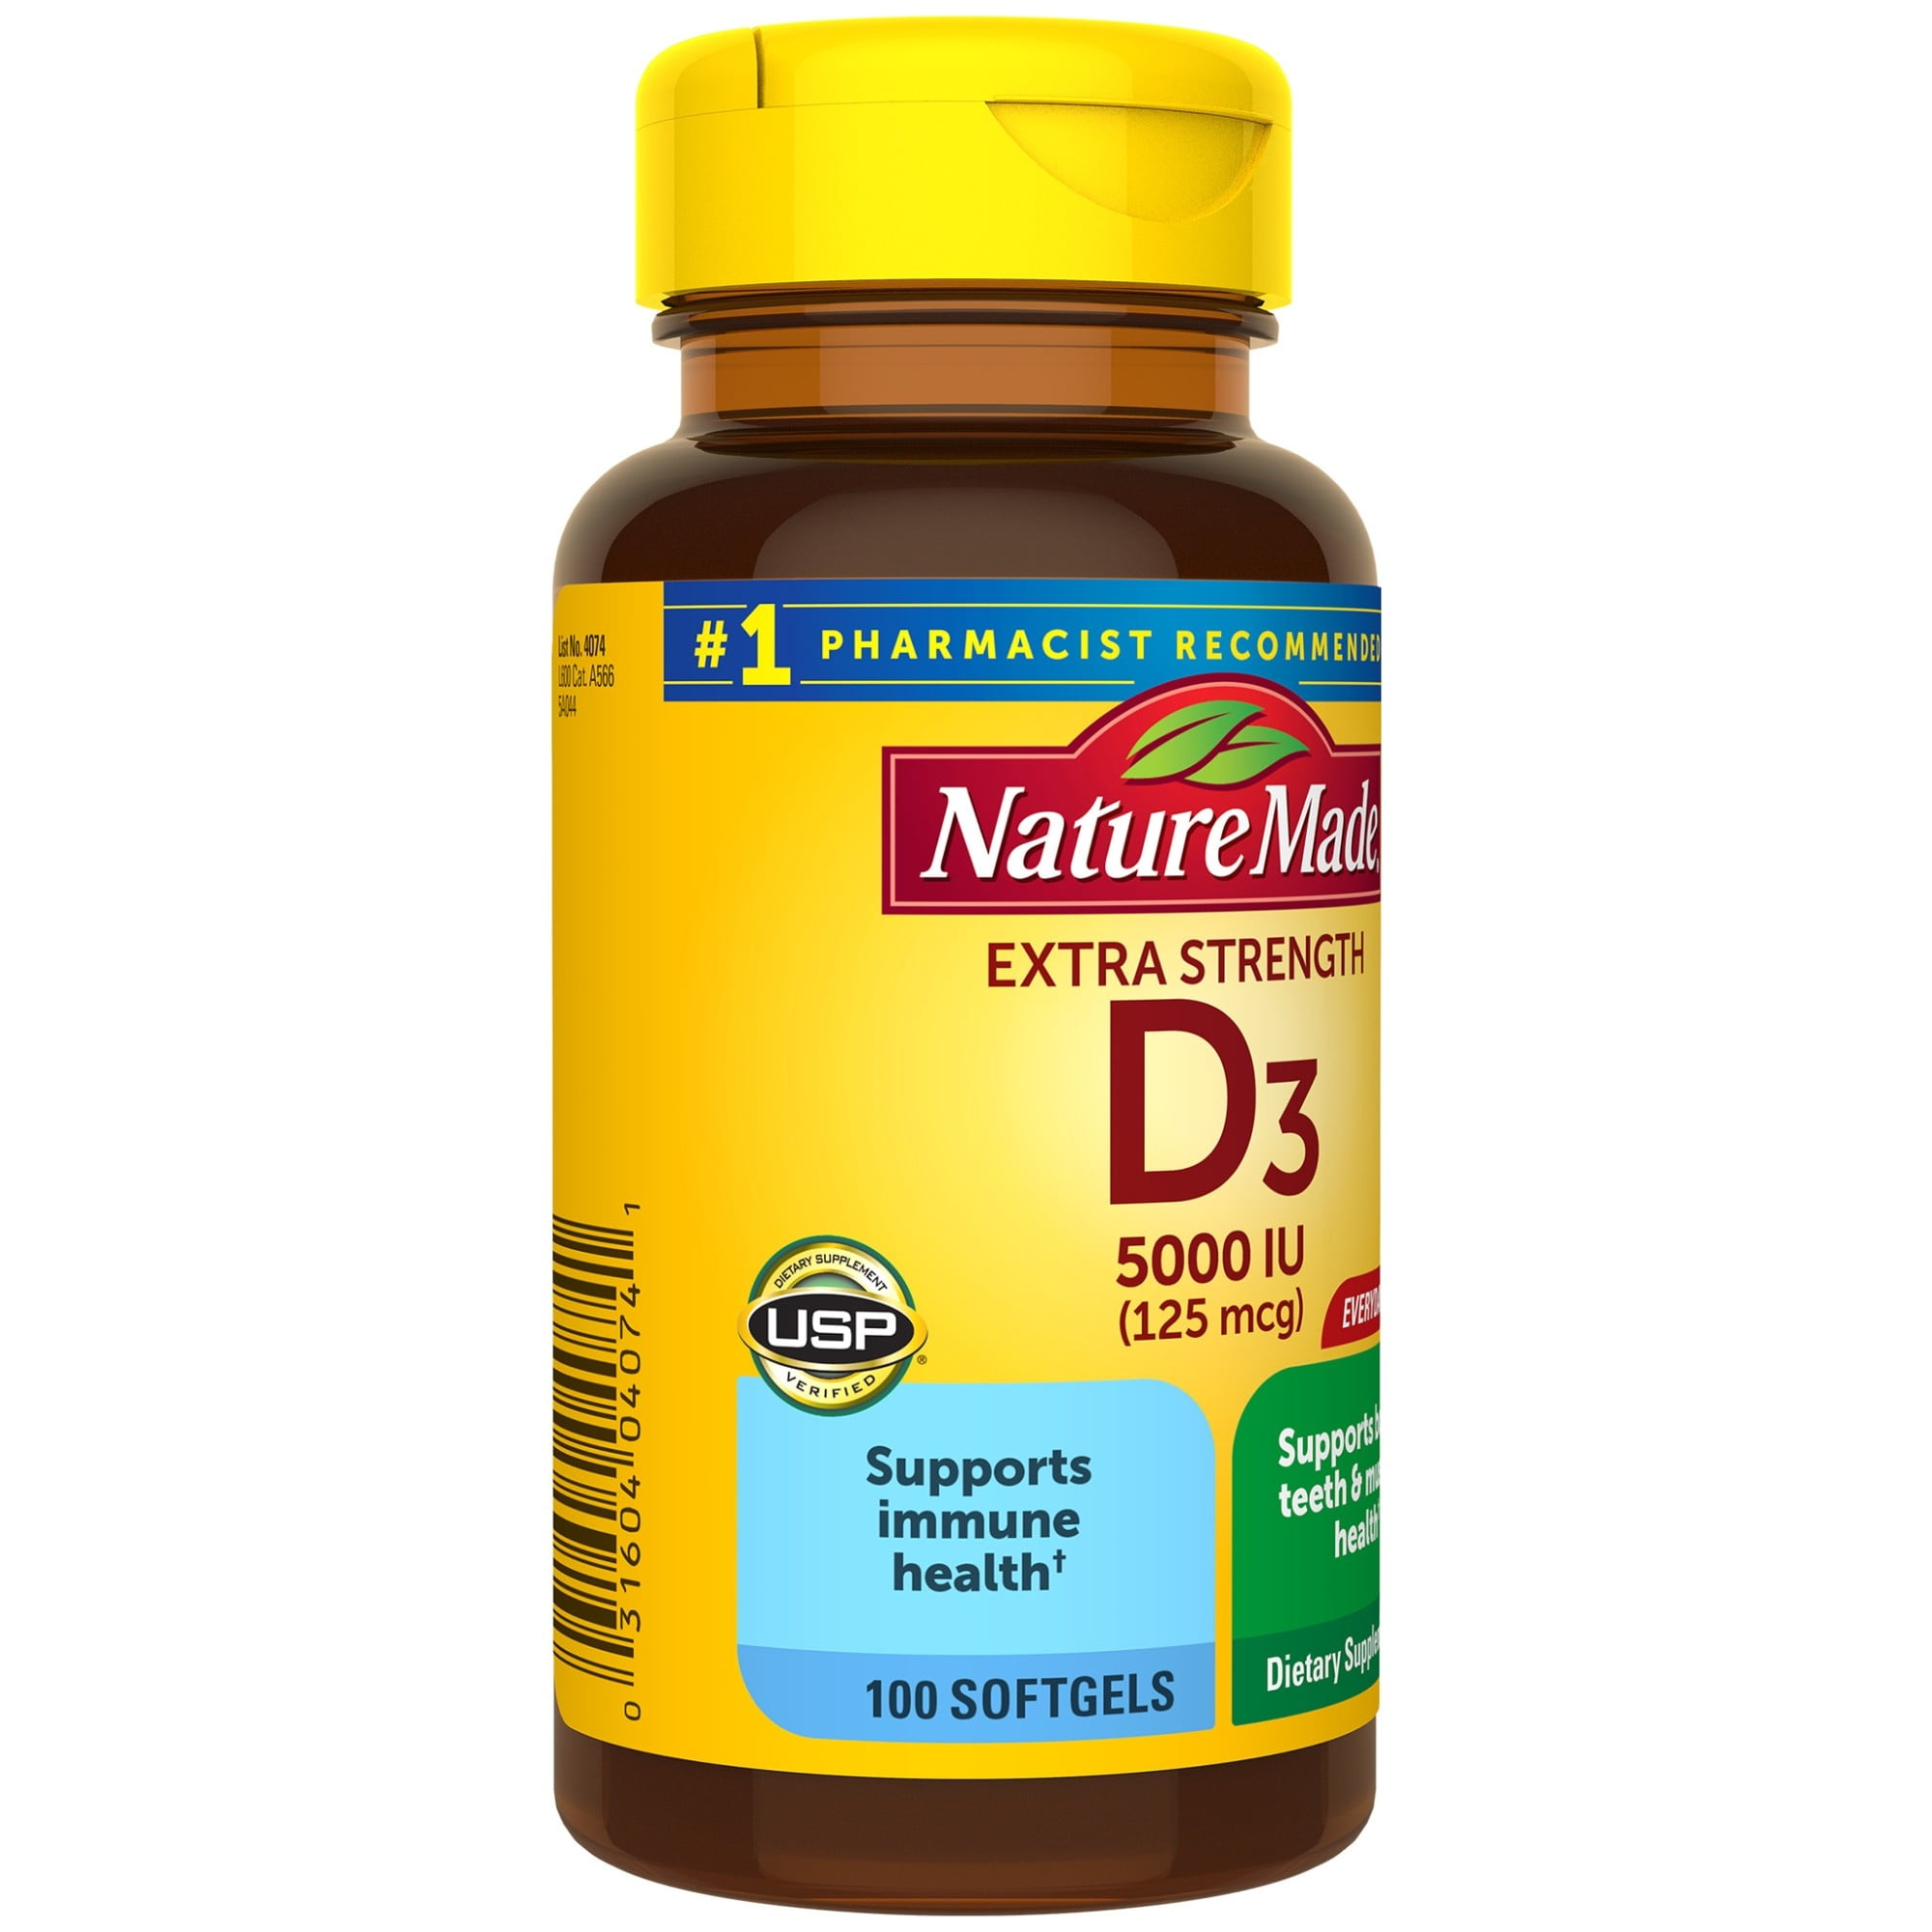 Nature Made Extra Strength Vitamin D3 5000 Iu 125 Mcg 100 Softgels High Potency Vitamin D Helps Support Immune Health Strong Bones And Teeth Muscle Function Walmart Com Walmart Com